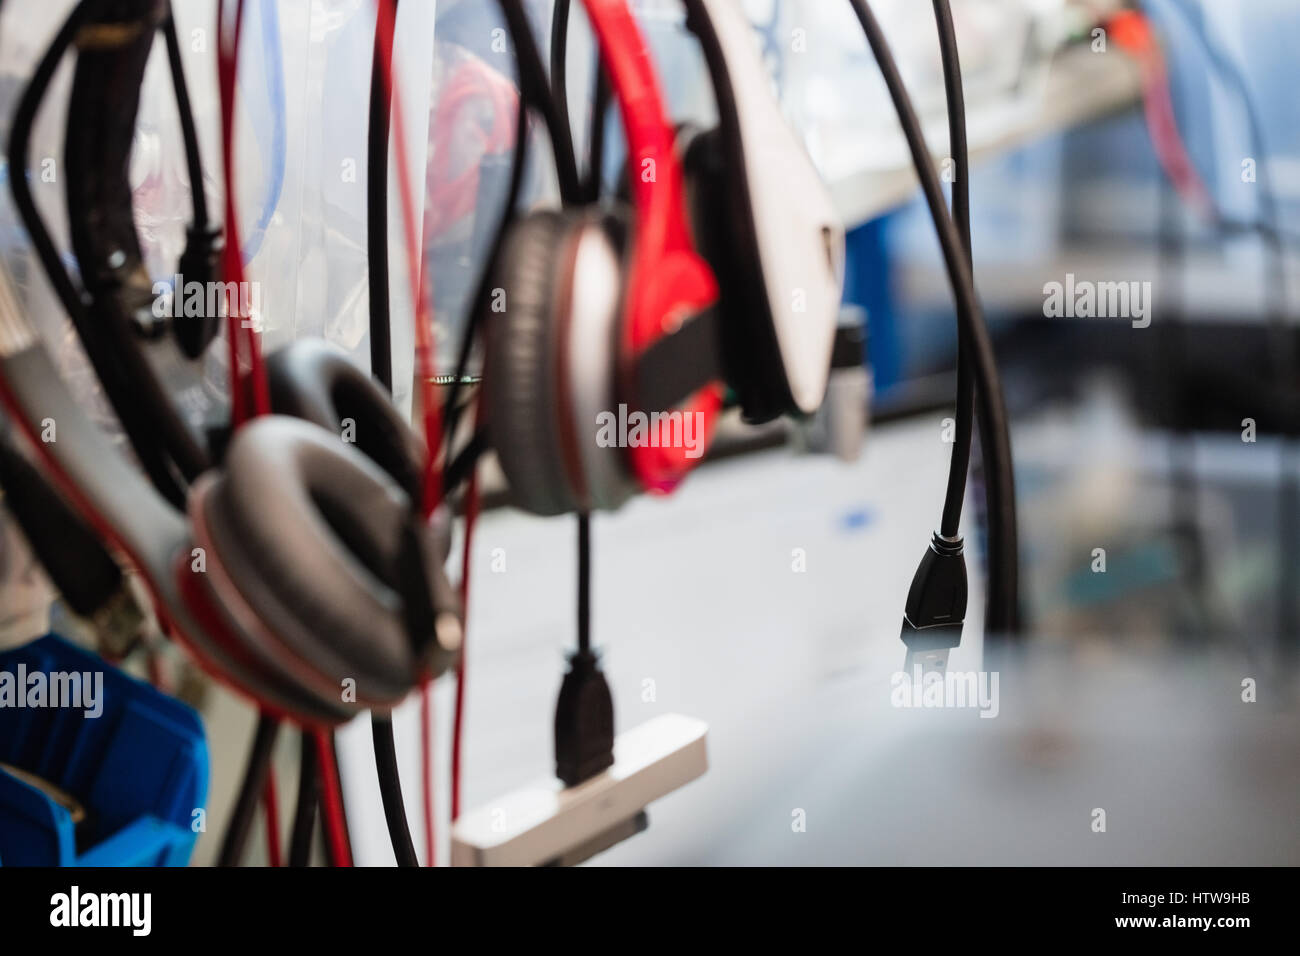 Data cables and headphones hanging in repair shop Stock Photo